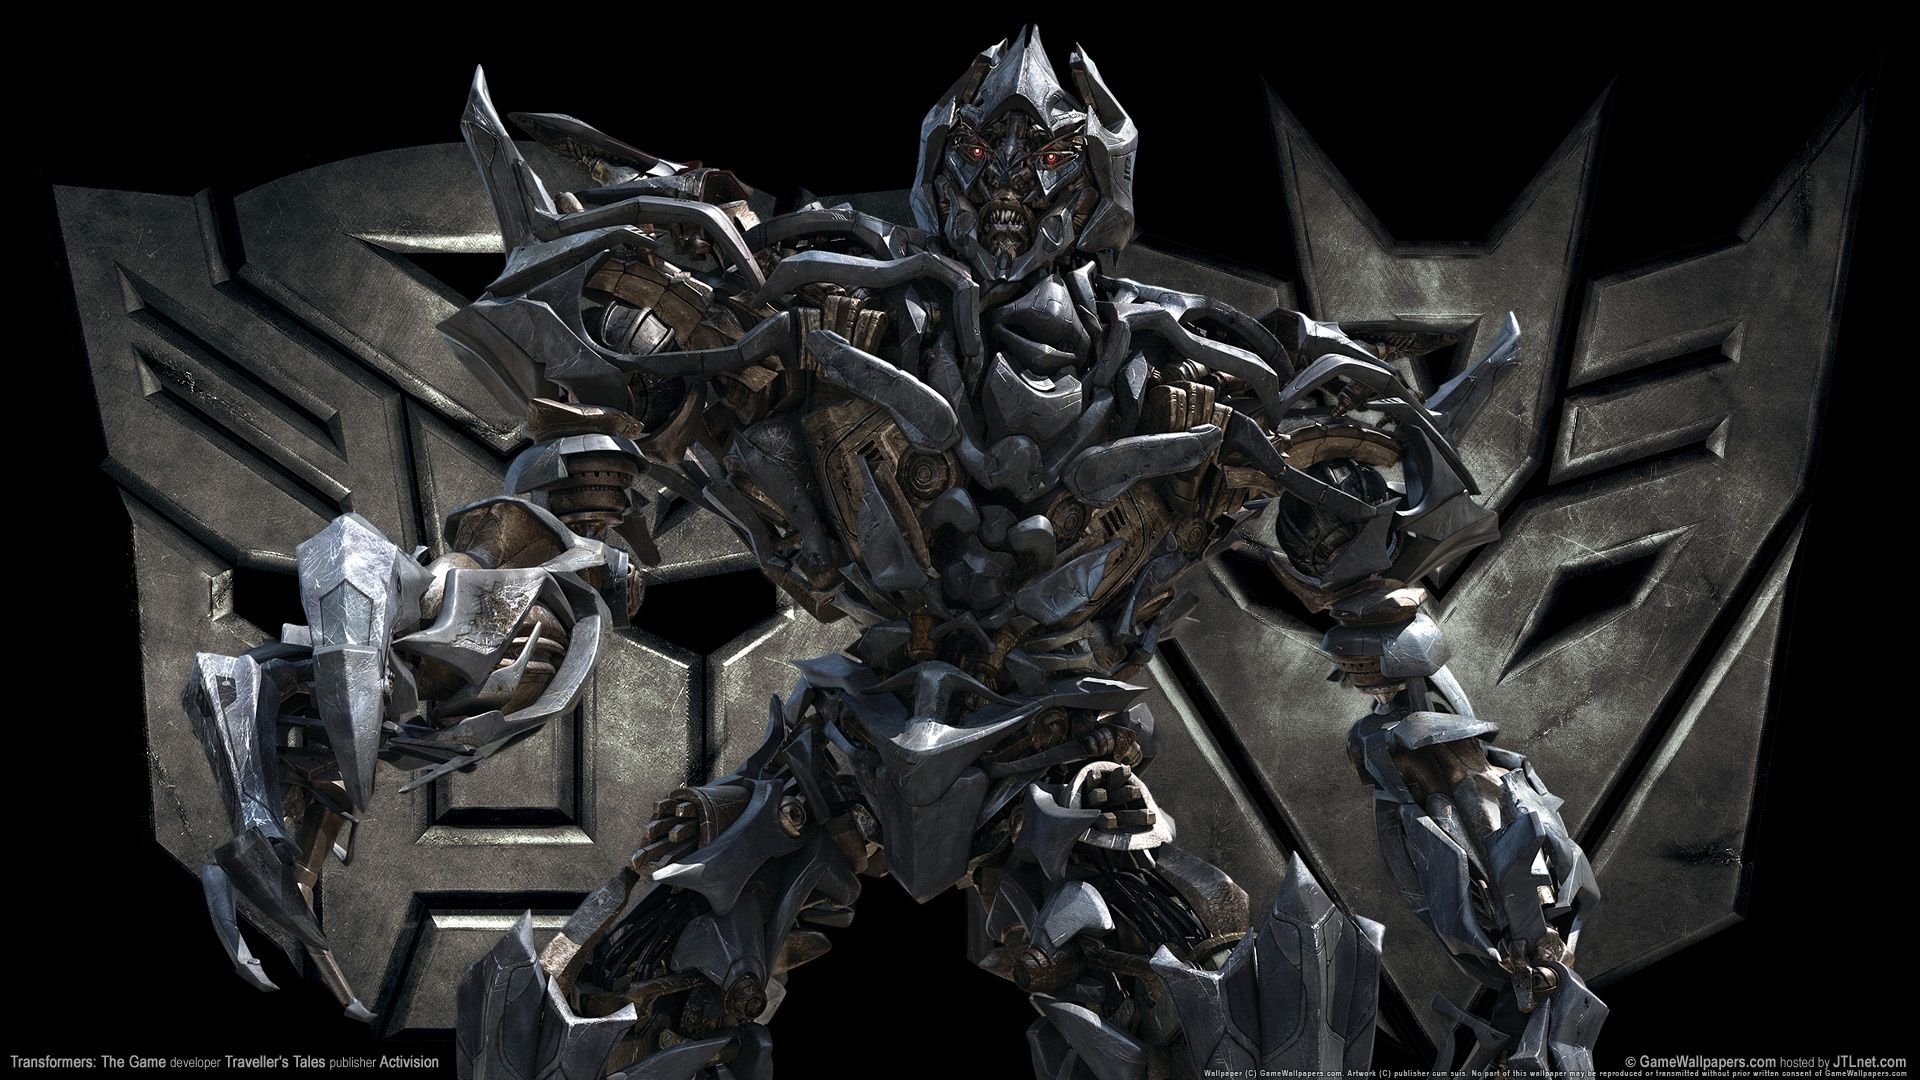 Transformers The Game Megatron Wallpaper in jpg format for free download